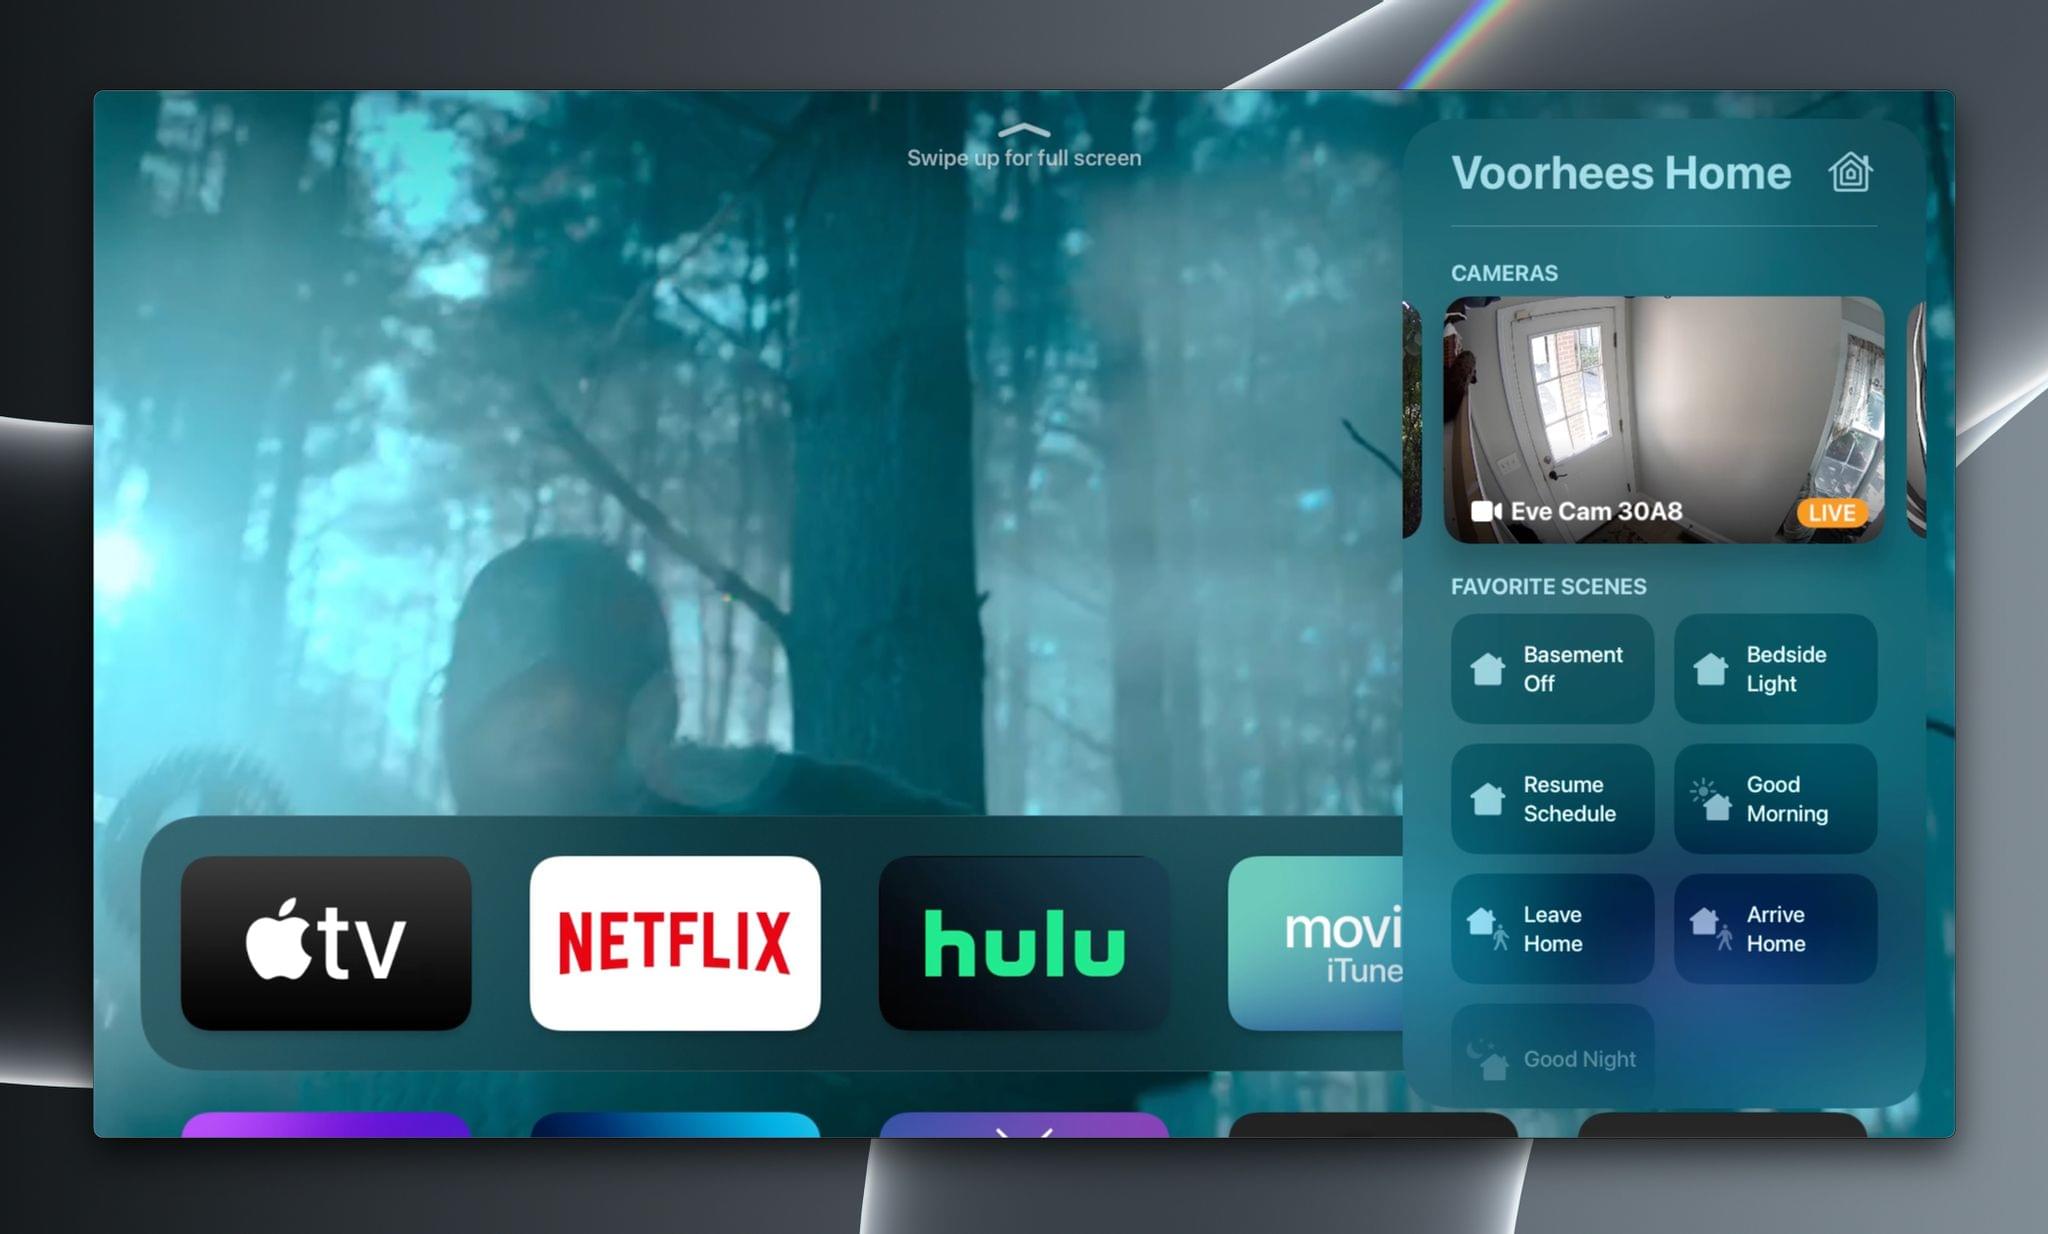 You can swipe through individual cameras or a grid of all cameras in the tvOS Comtrol Center.